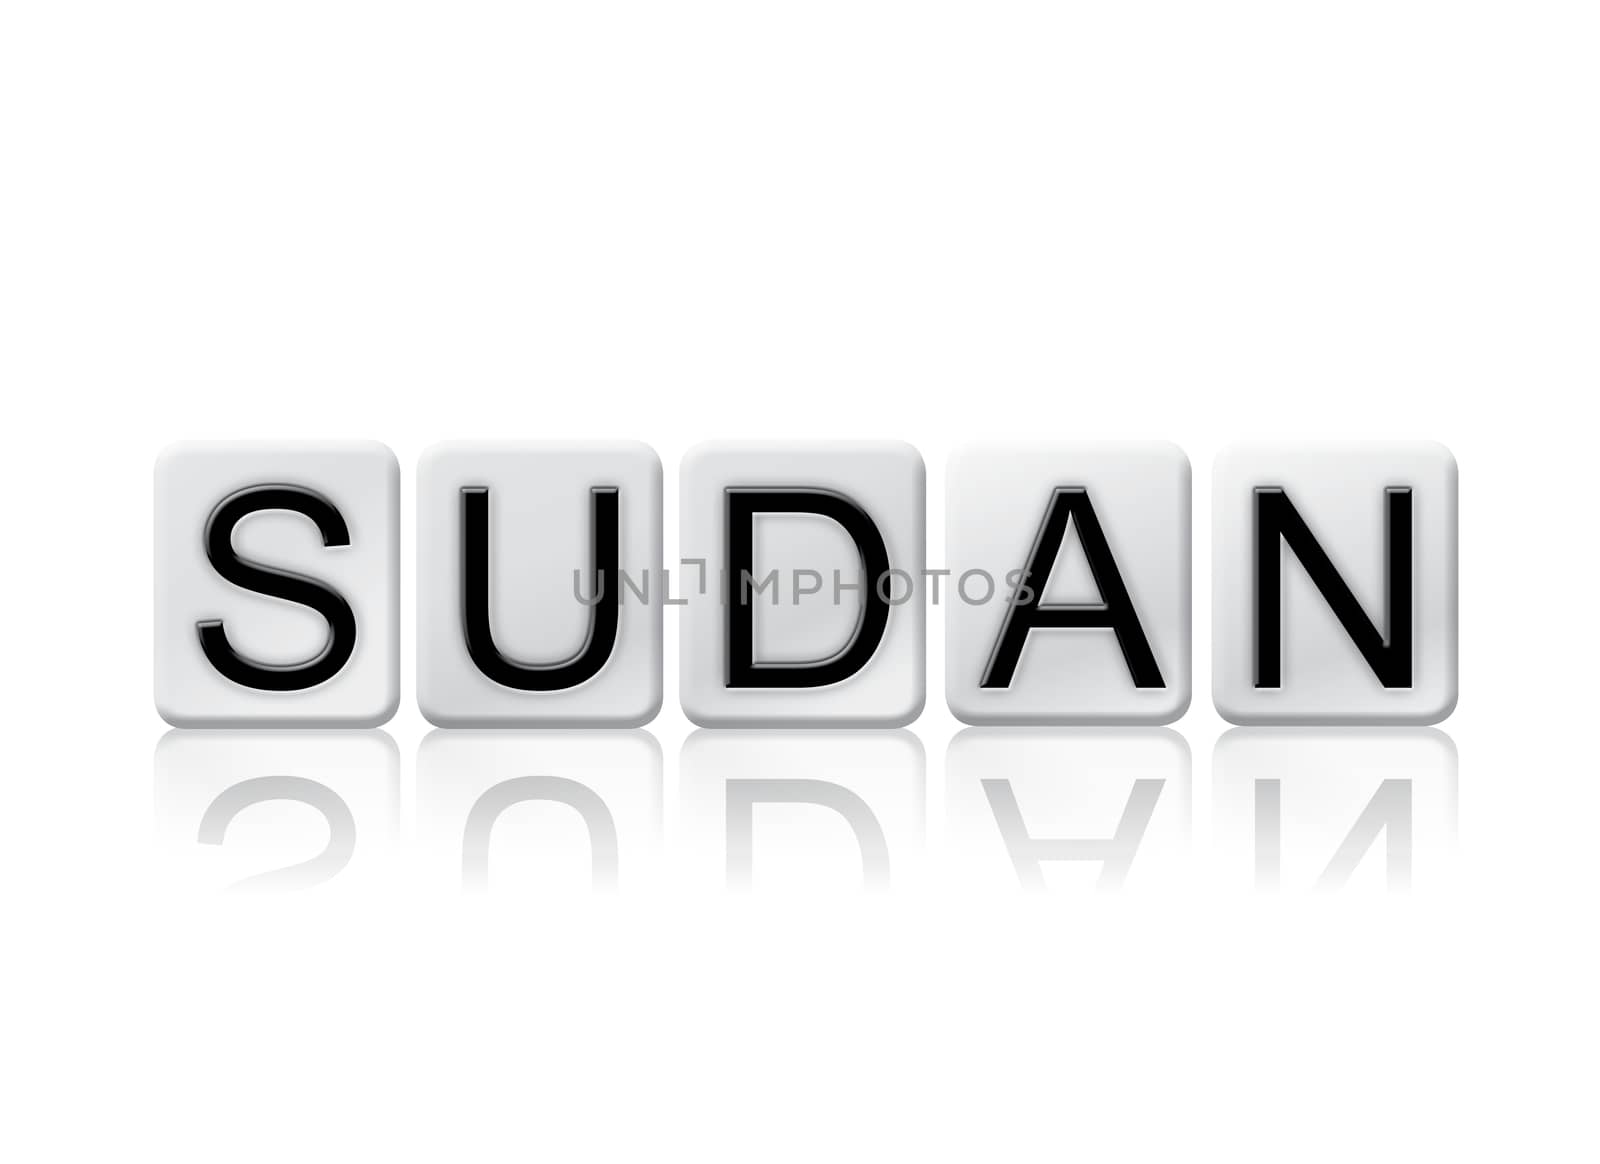 The word "Sudan" written in tile letters isolated on a white background.